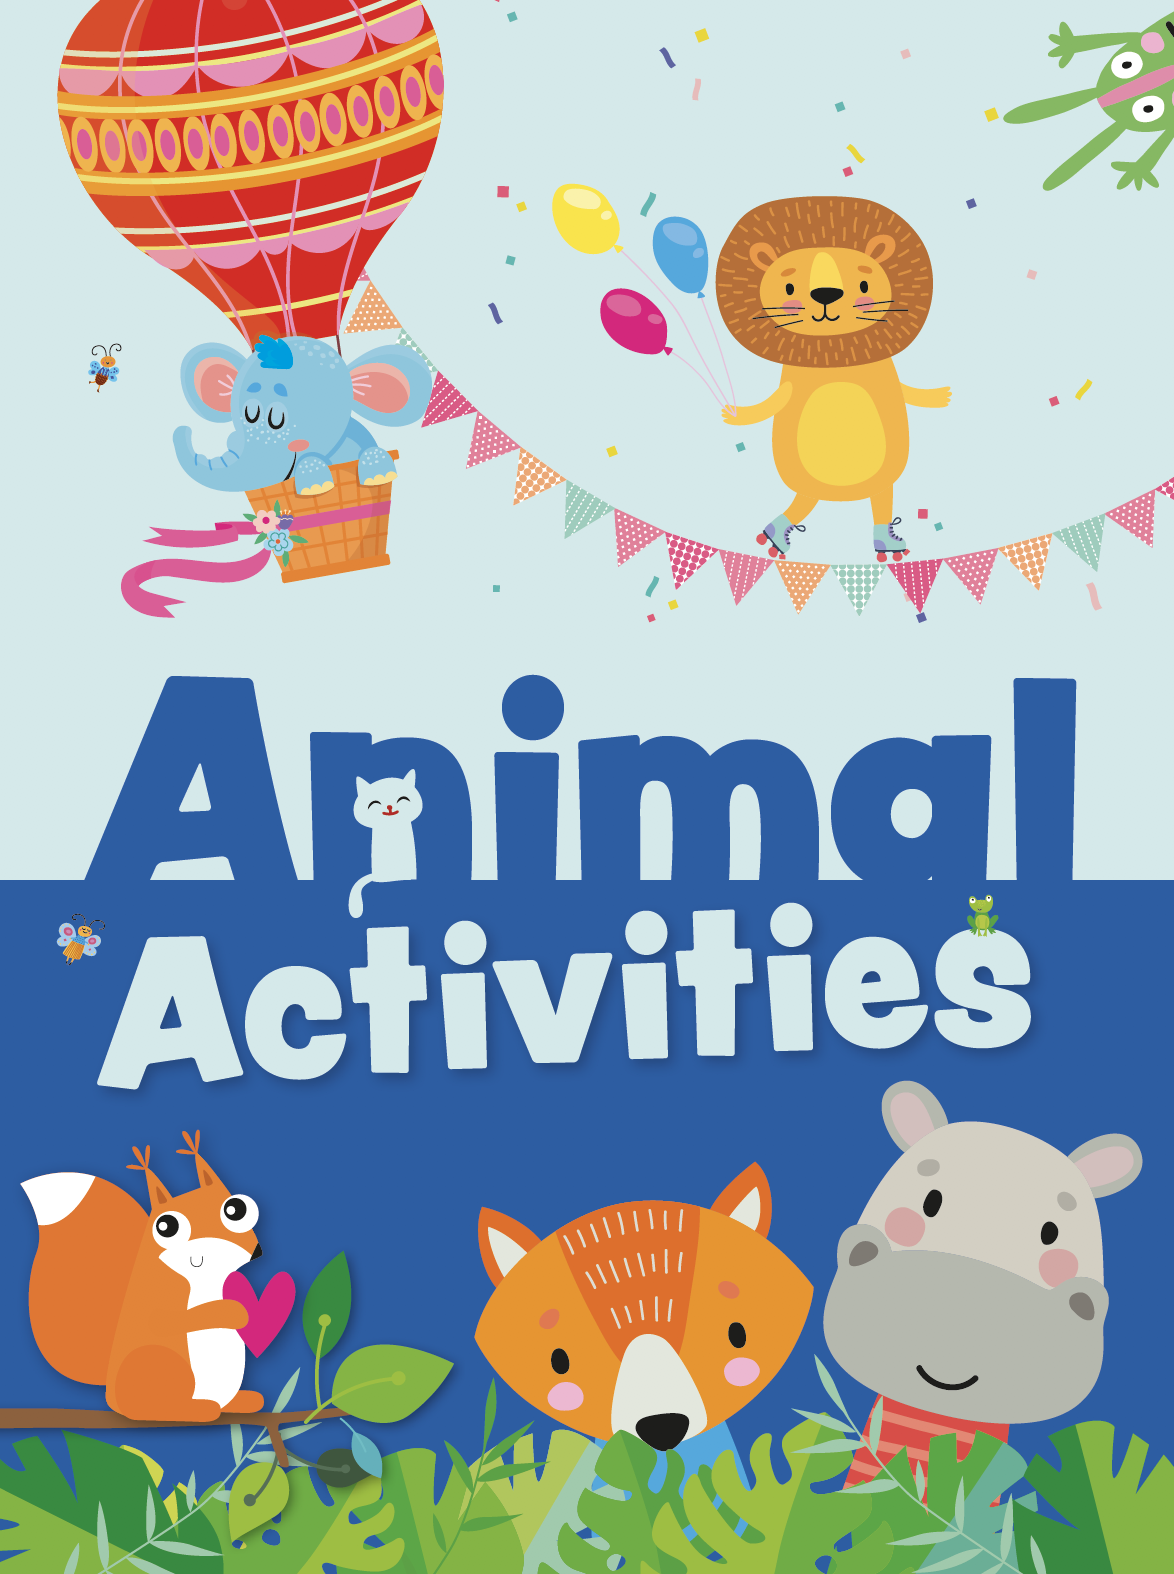 Animal Activities - cover 5